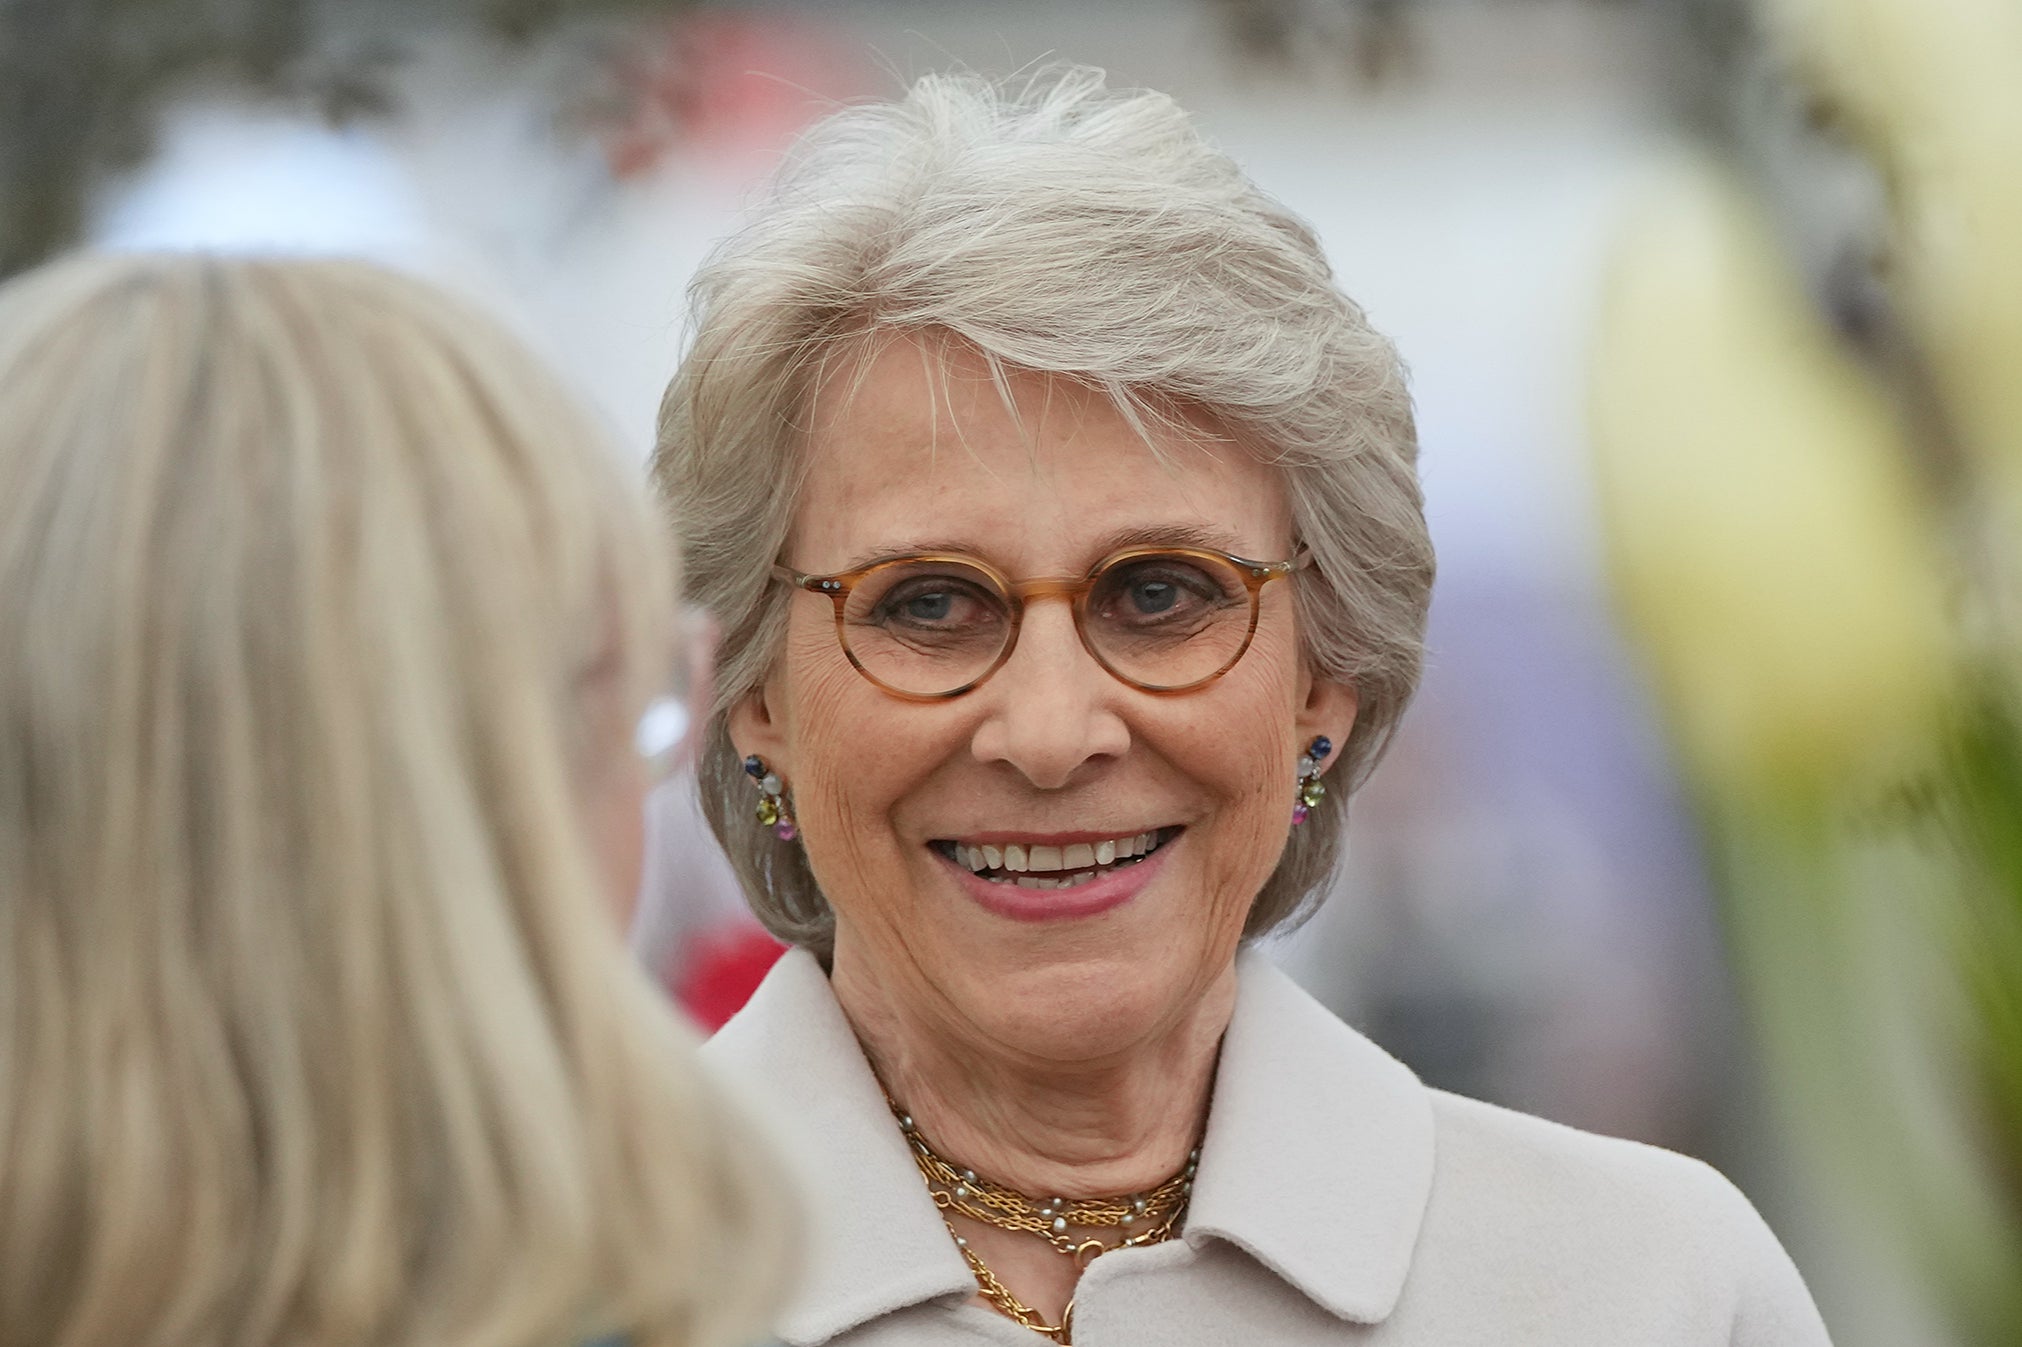 The Duchess of Gloucester is known for being an avid tennis spectator